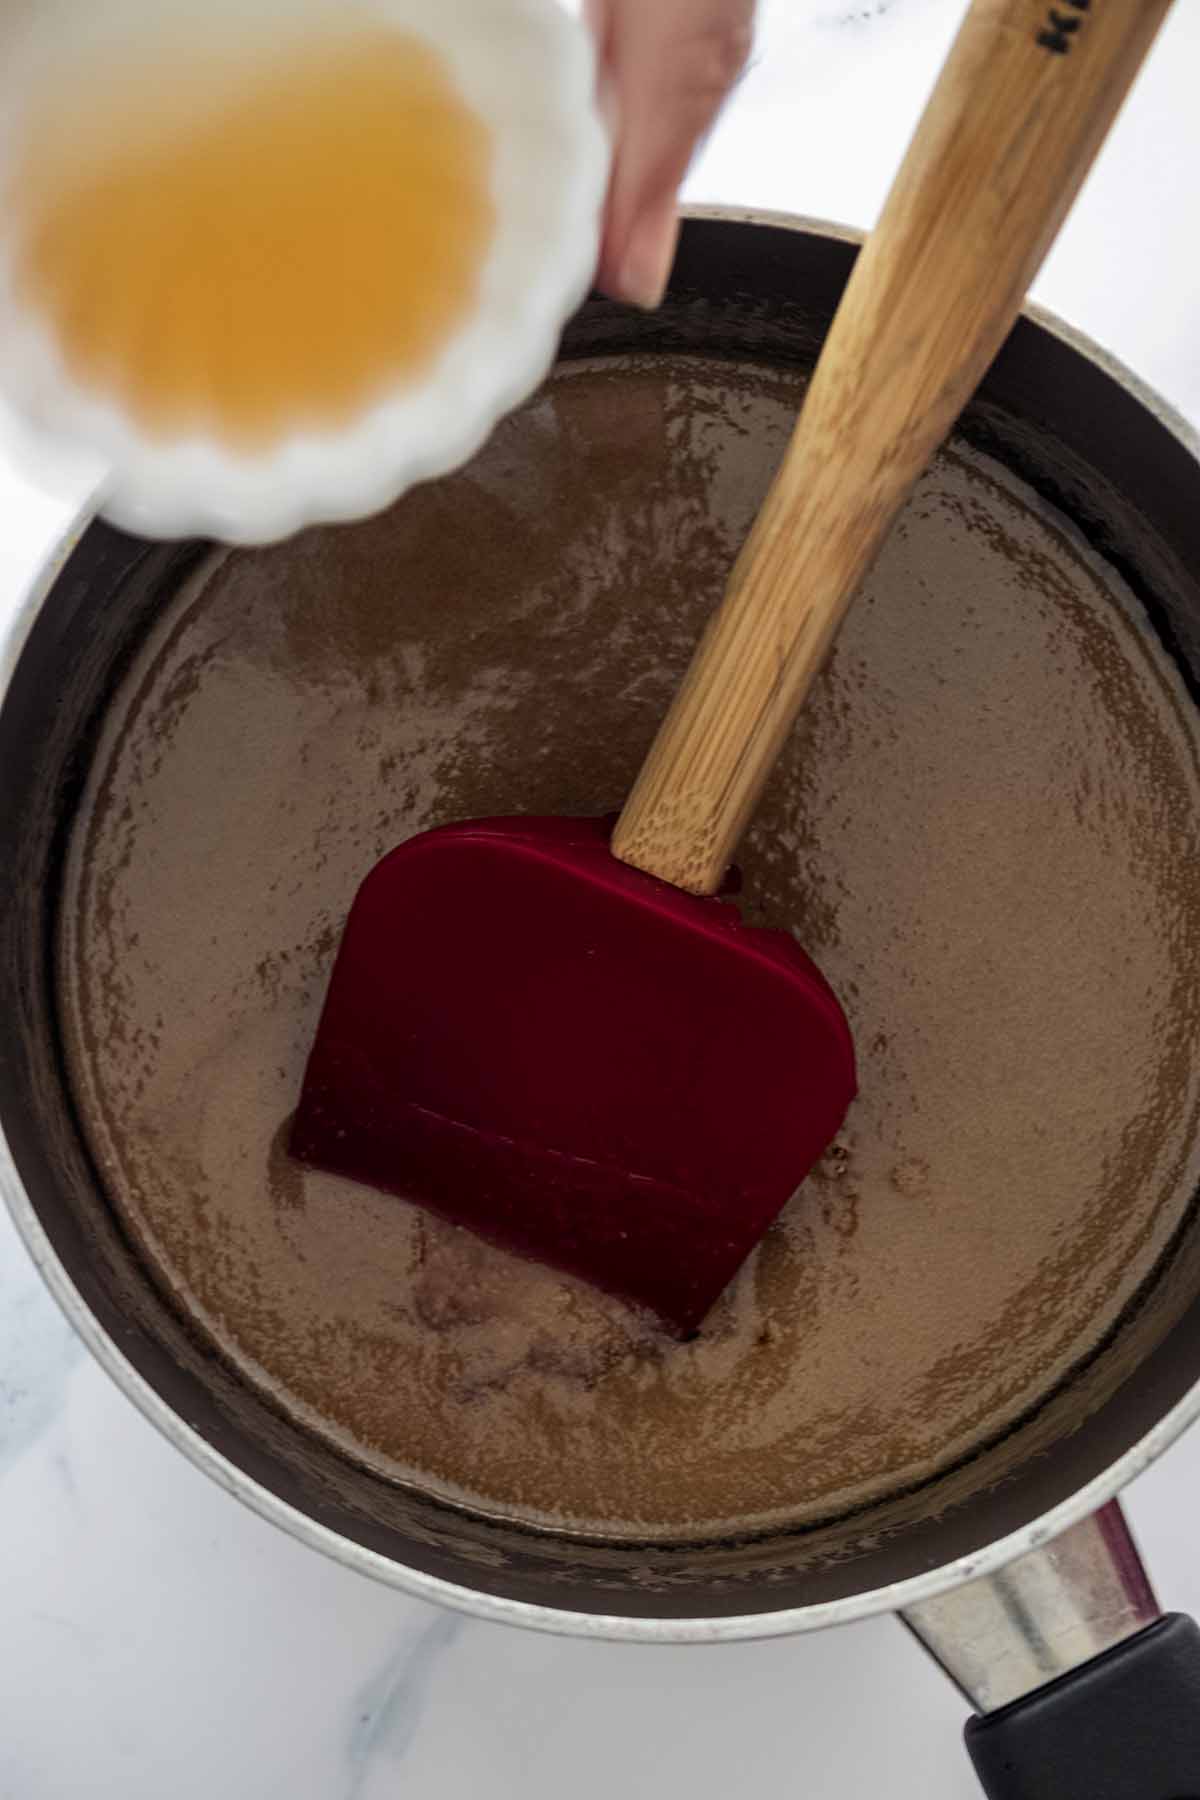 Vanilla extract being added to a saucepan